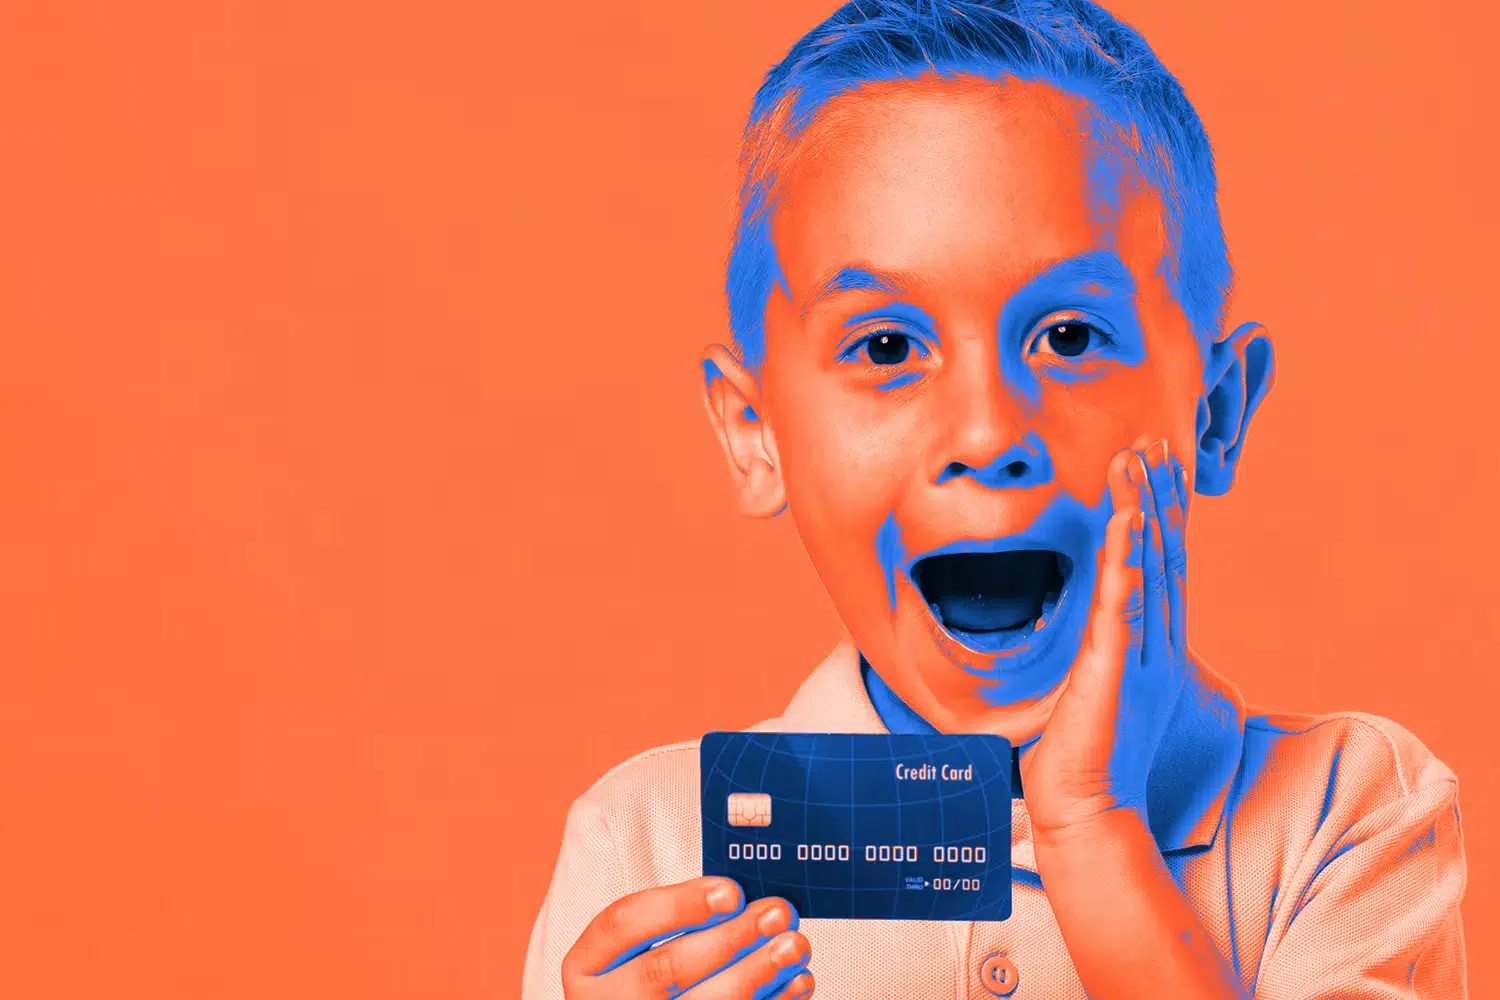 Child holding credit card